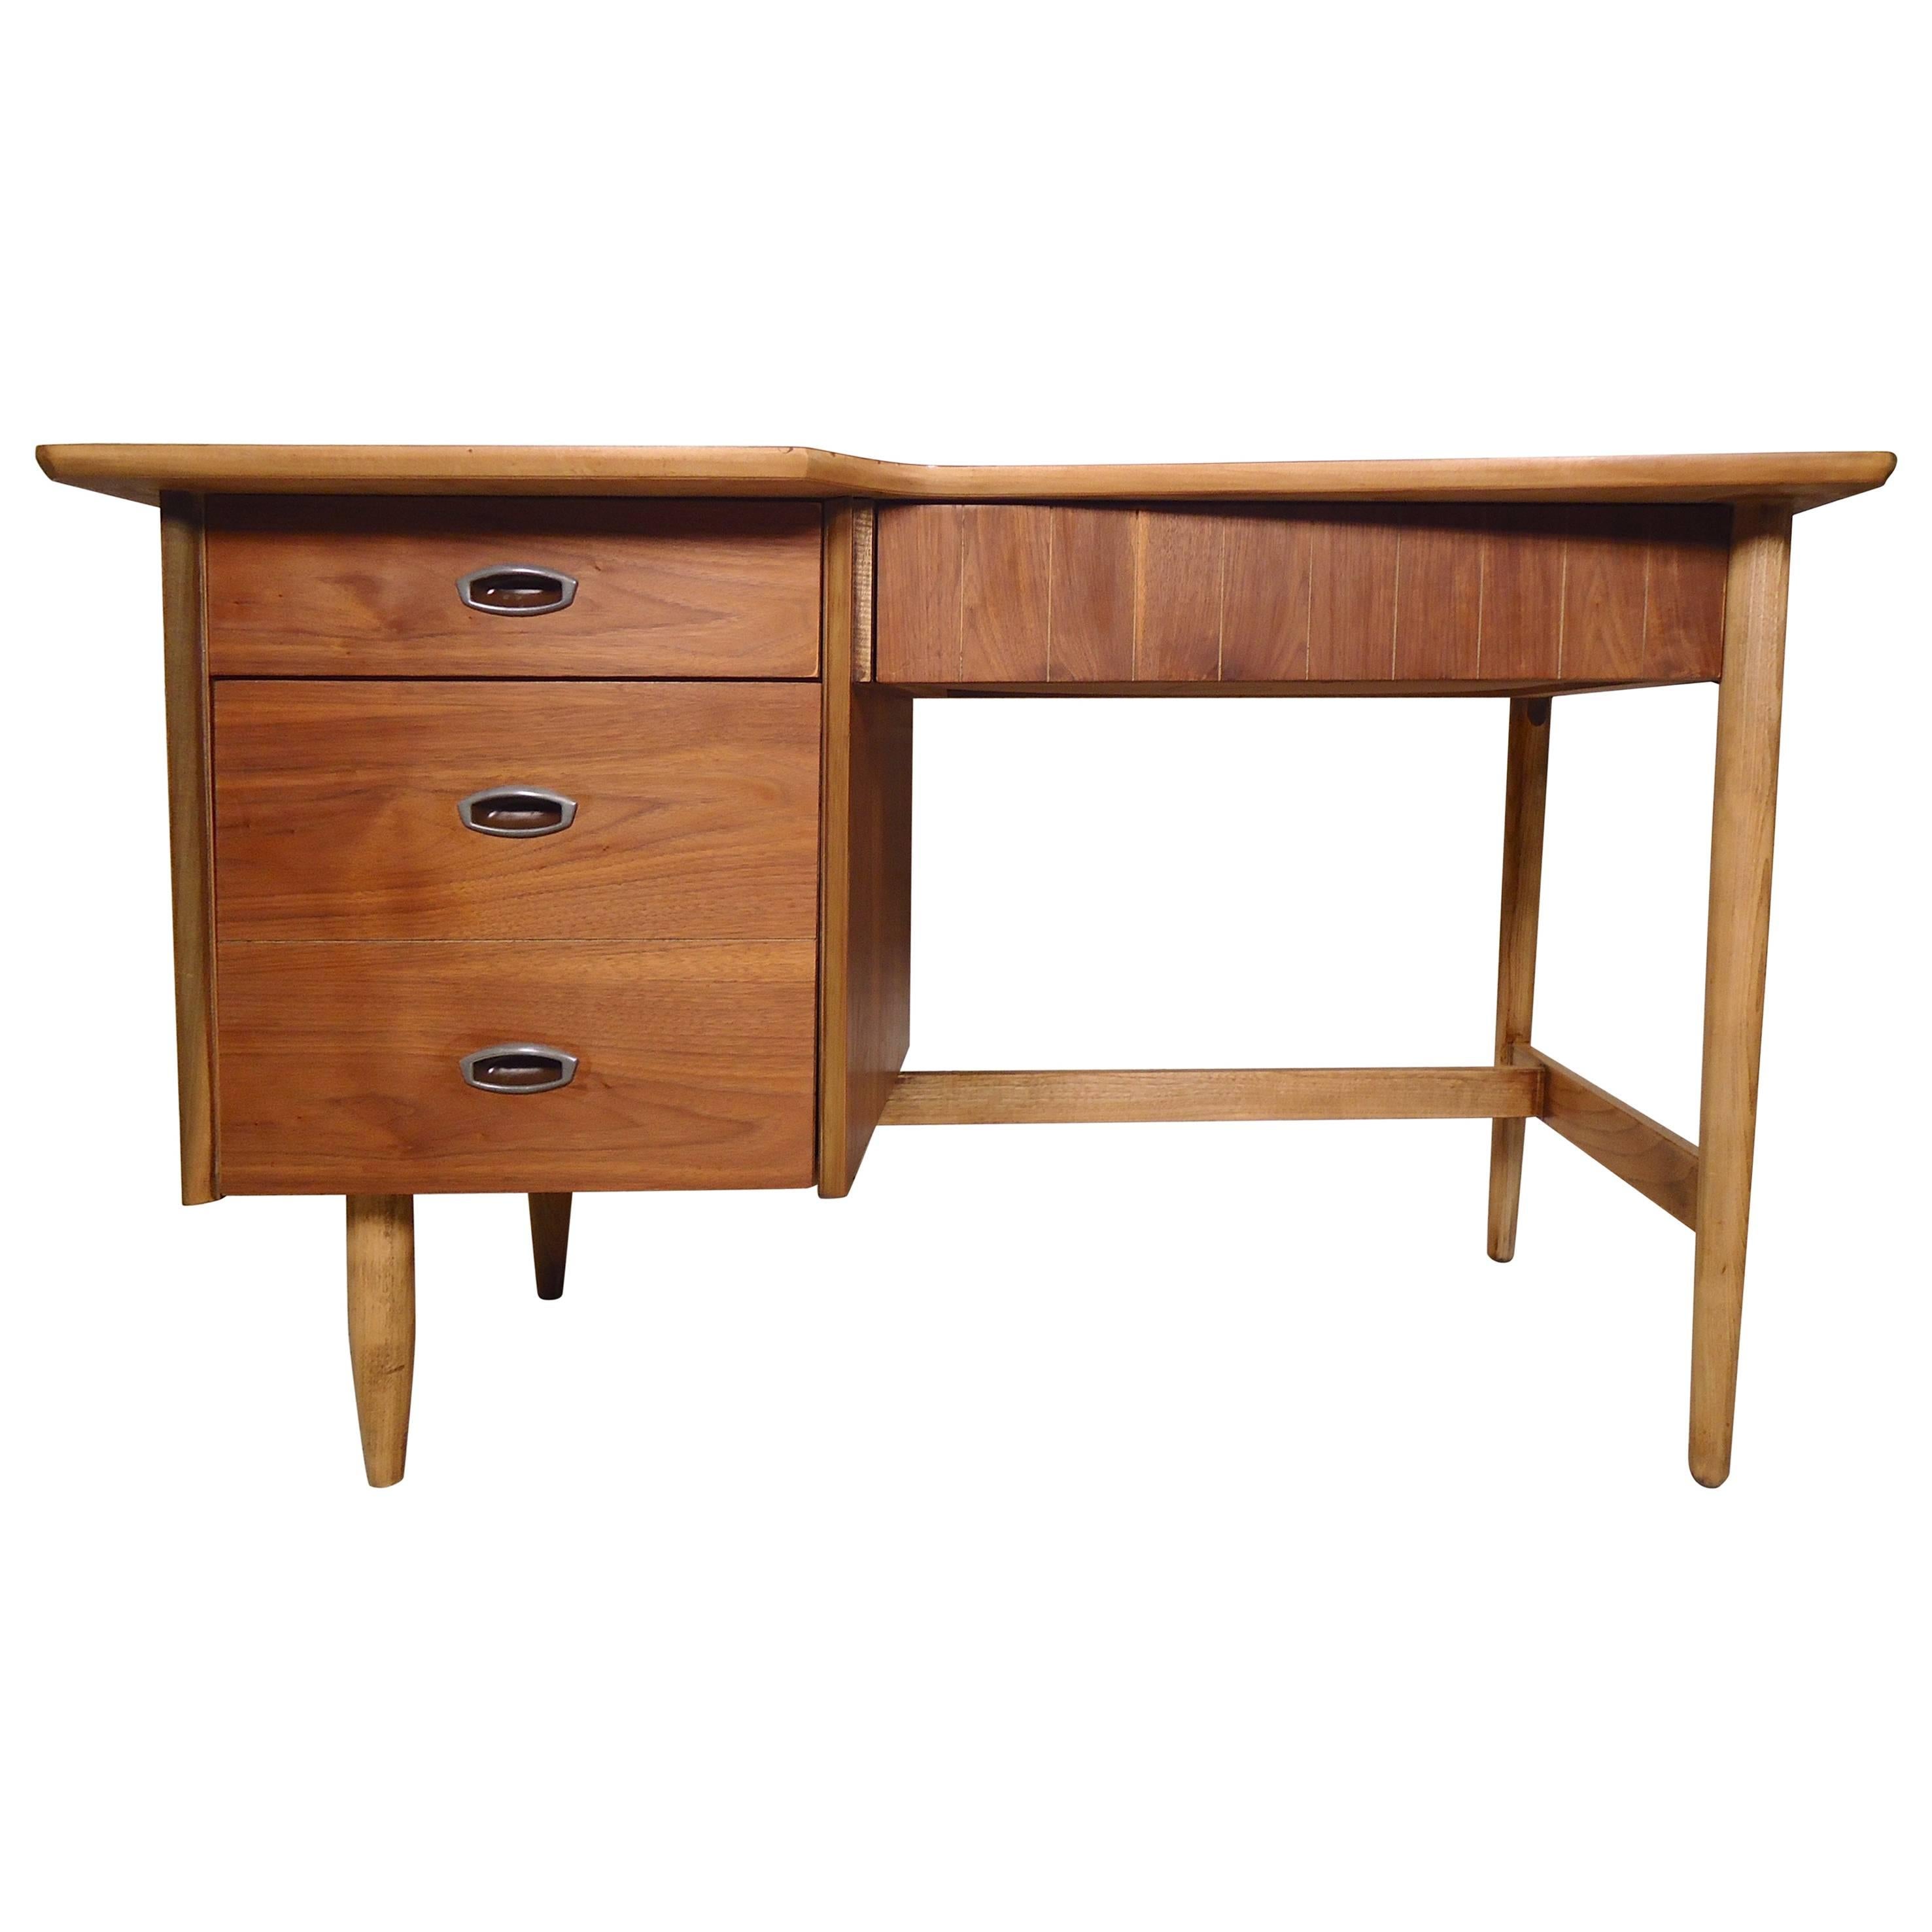 American Mid-Century Desk with Cut Out Top